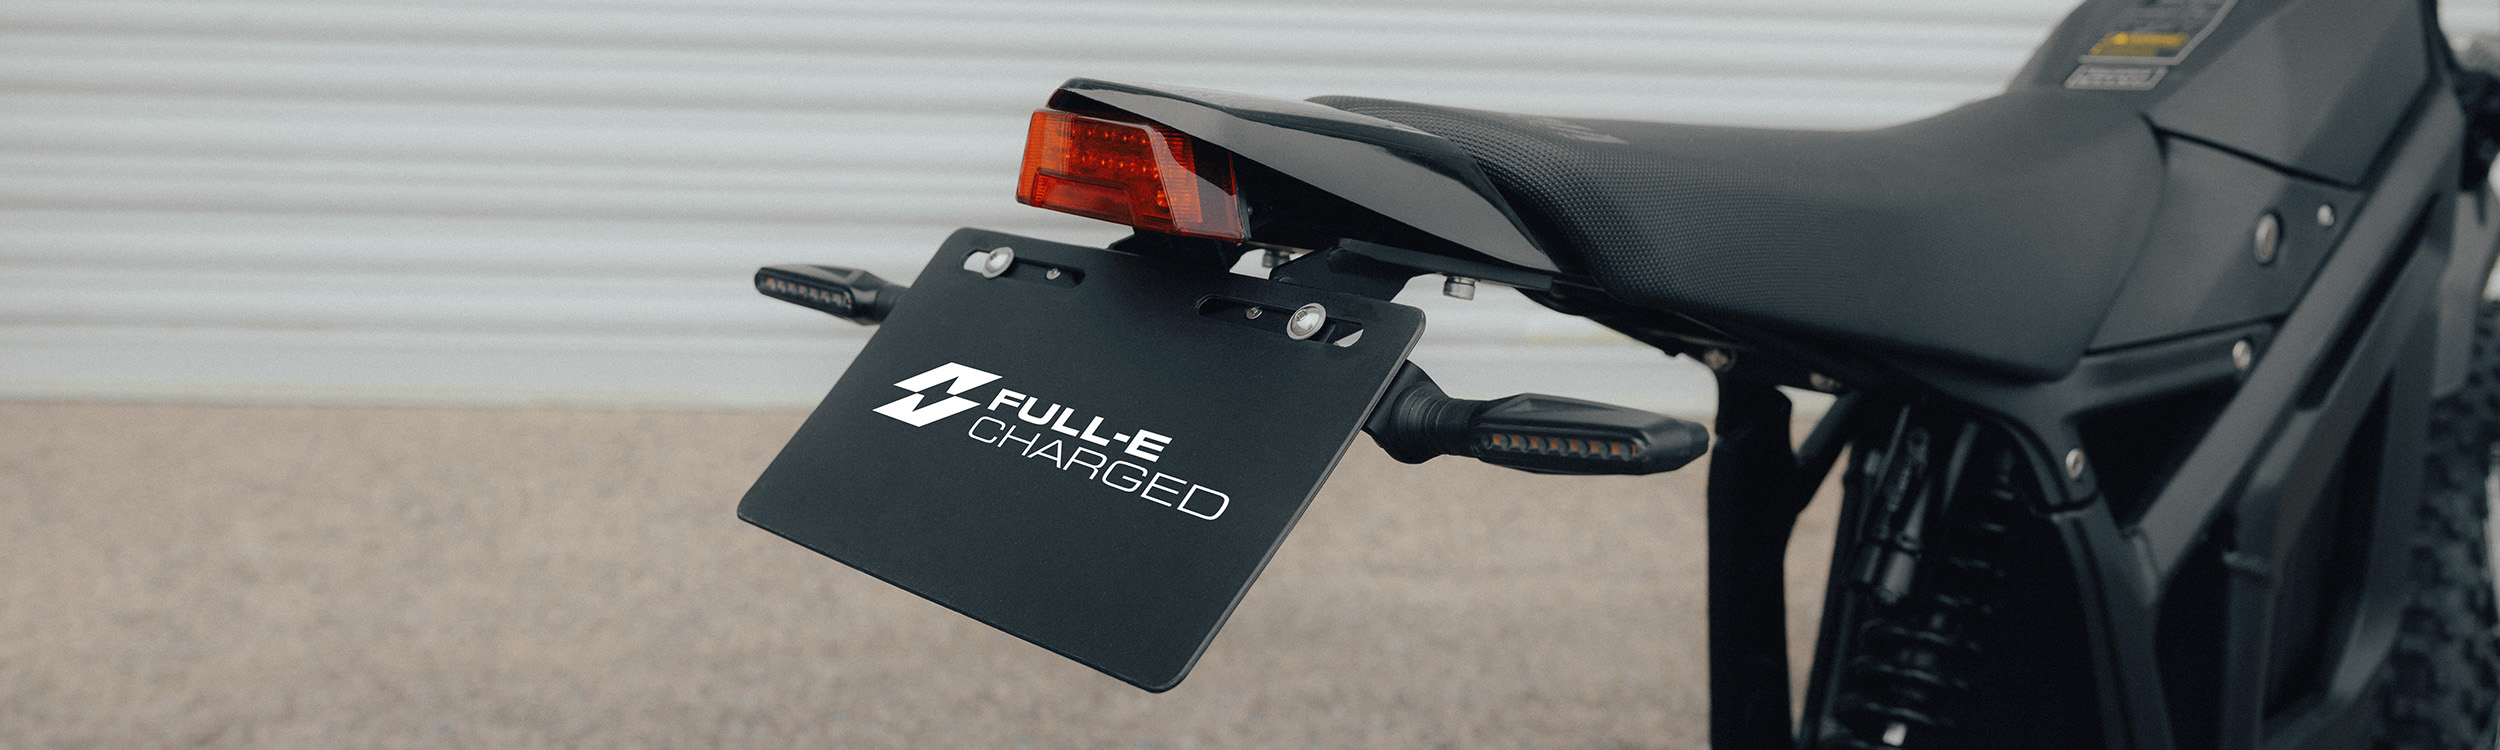 Full-E Charged Tail Tidy for TL45